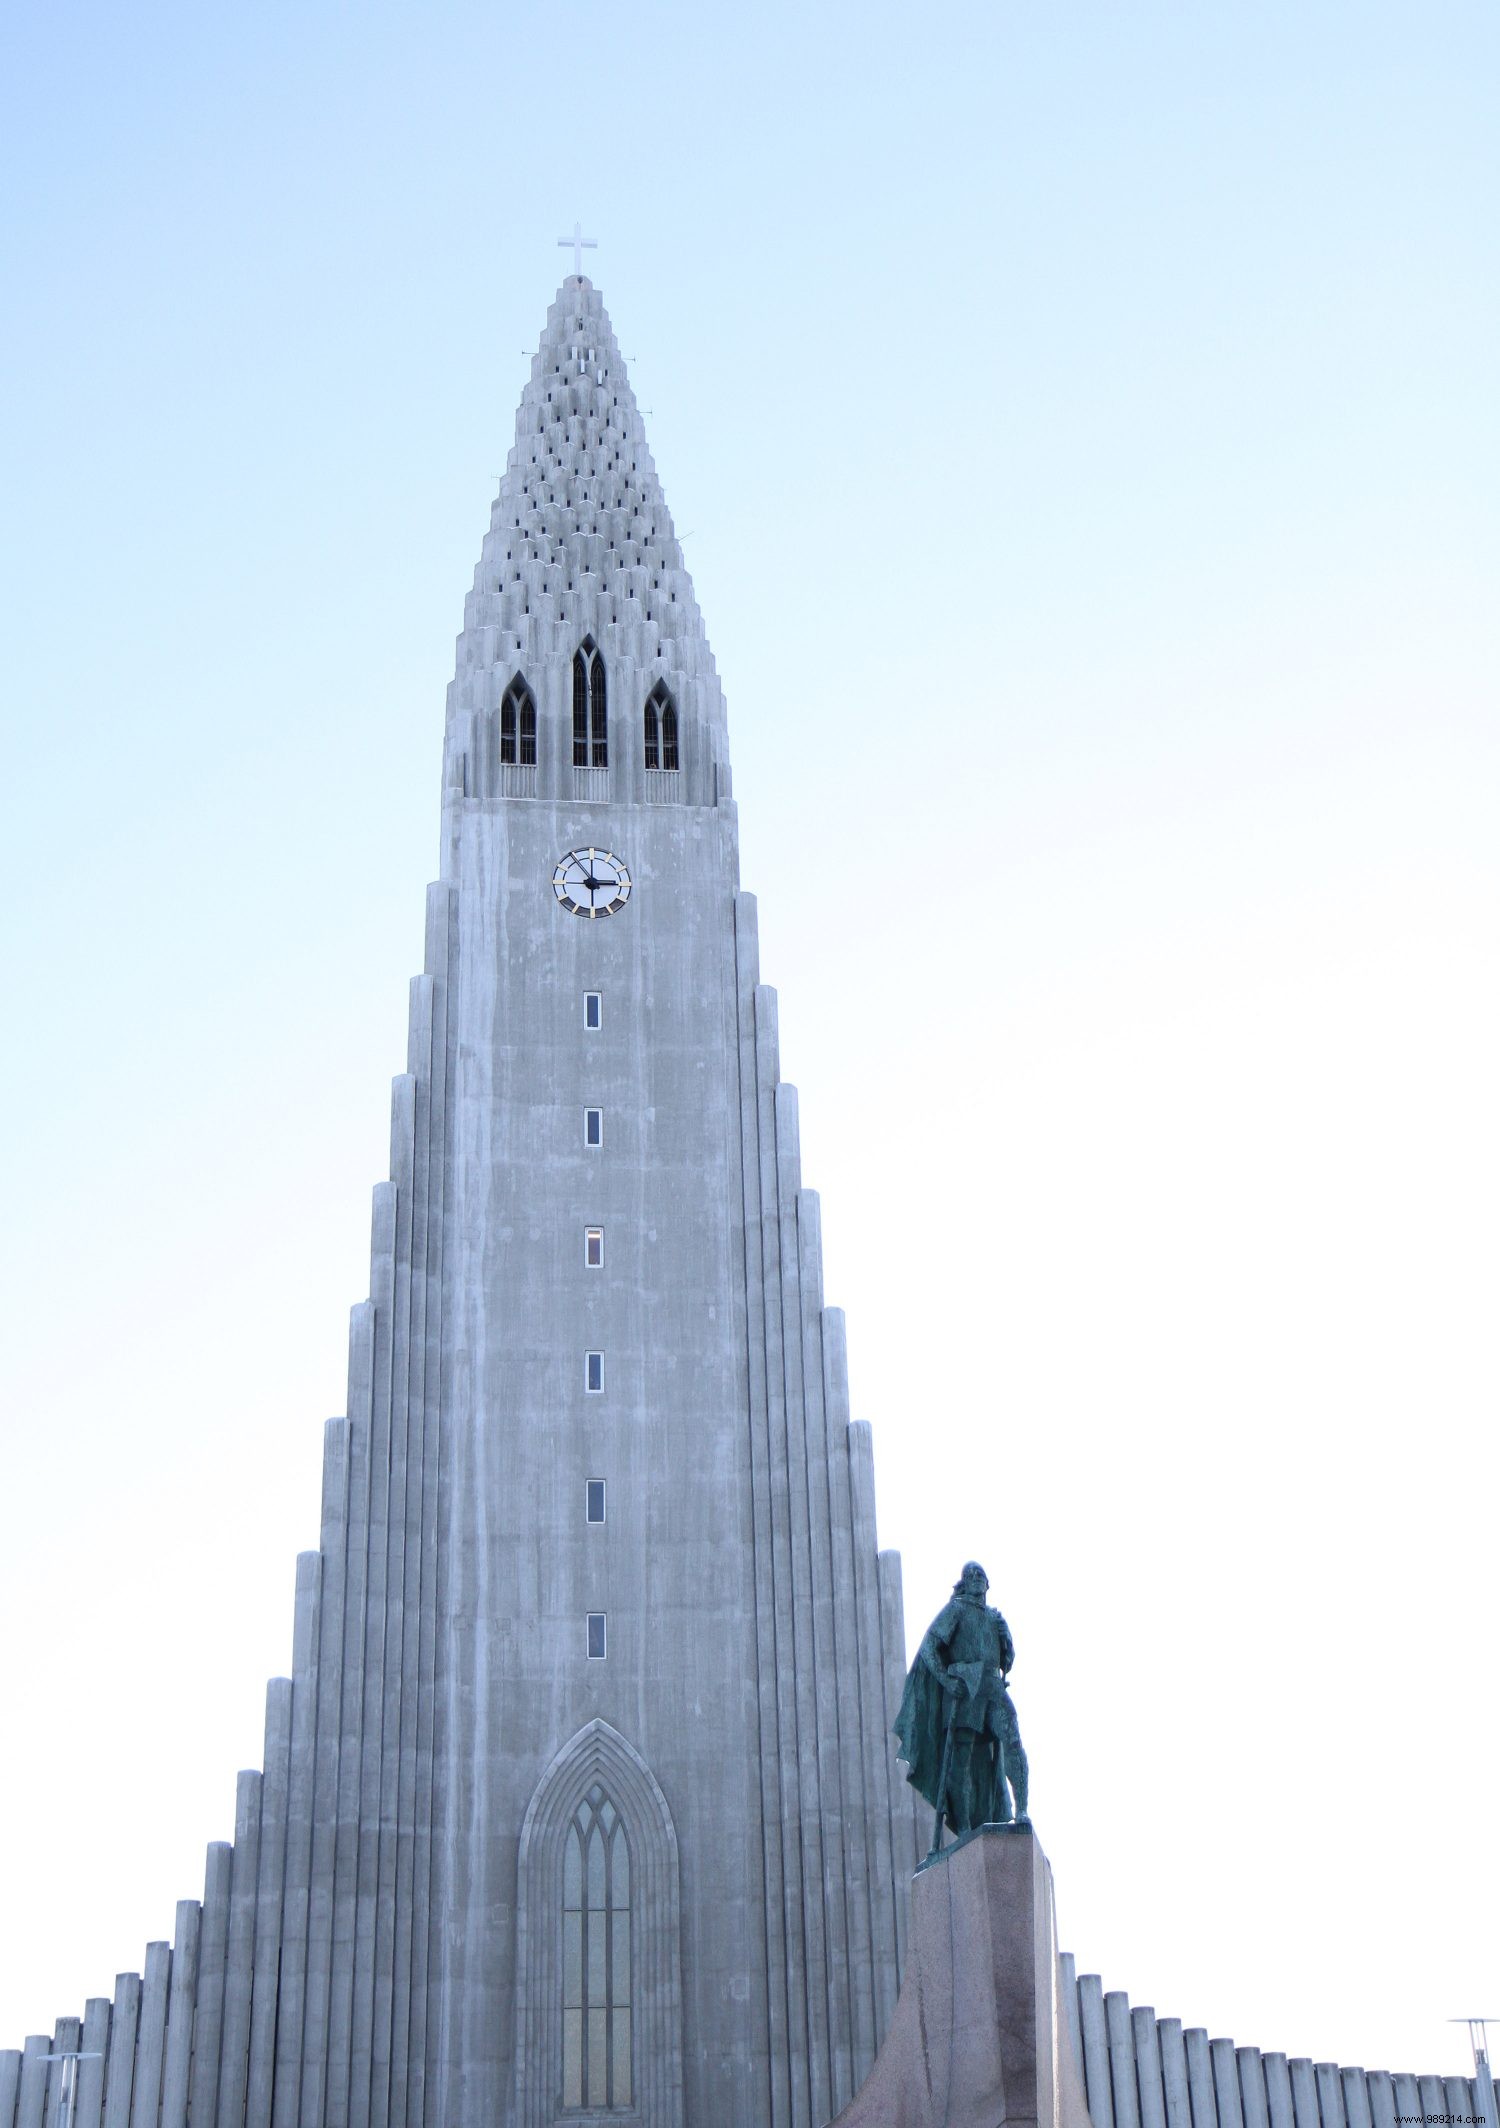 5 things to do in Iceland 